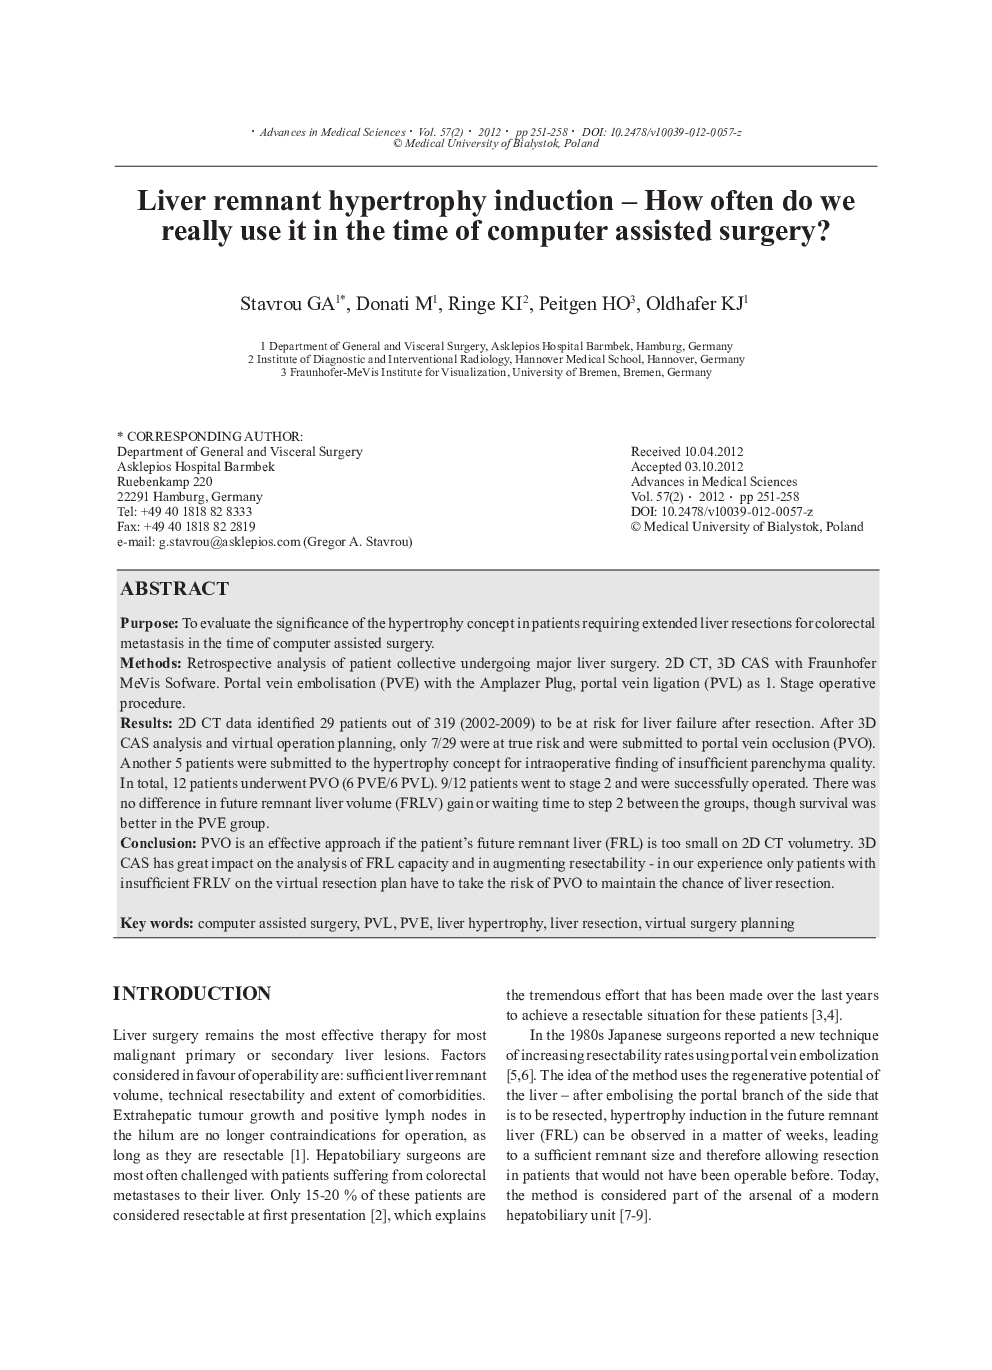 Liver remnant hypertrophy induction – How often do we really use it in the time of computer assisted surgery?